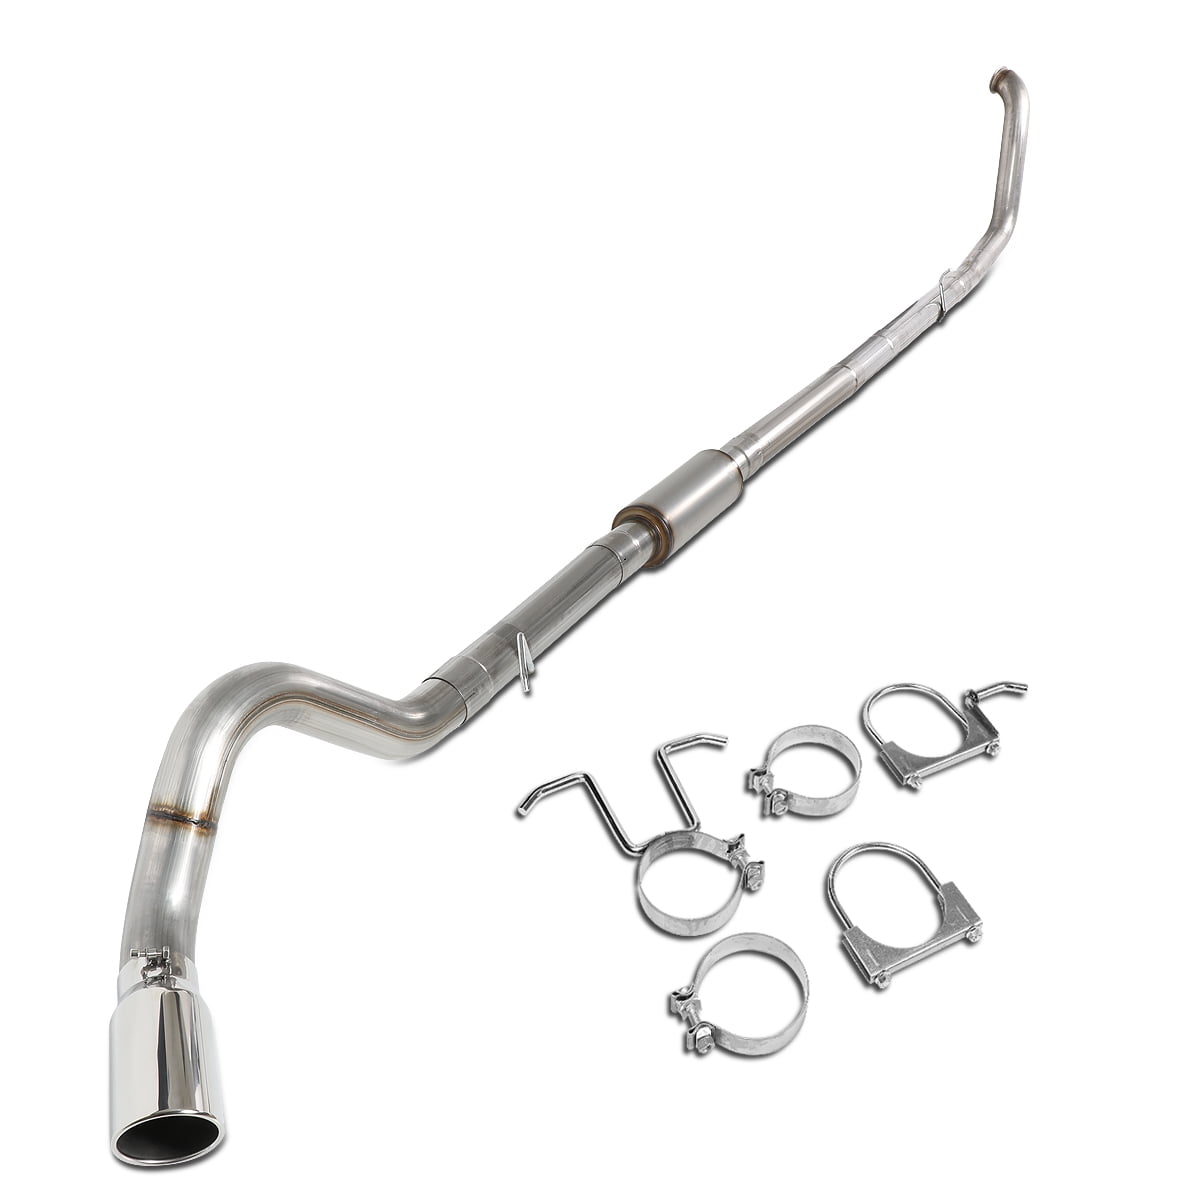 For 1999 to 2003 Ford F250 F350 Super Duty 7.3L Diesel 4"OD Piping